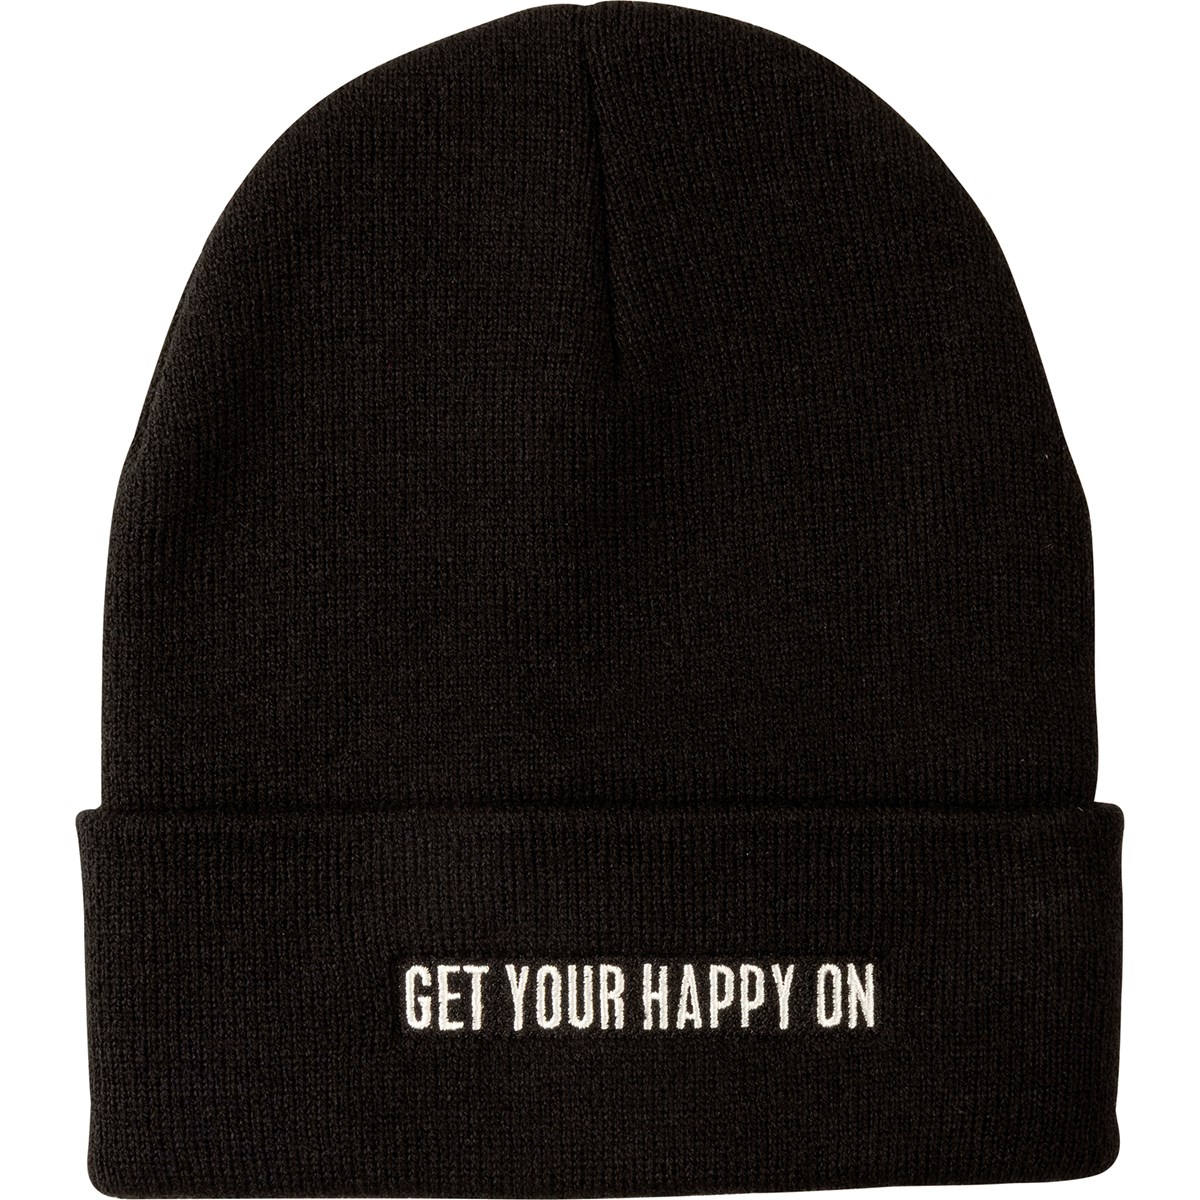 Get Your Happy On Beanie - Acrylic